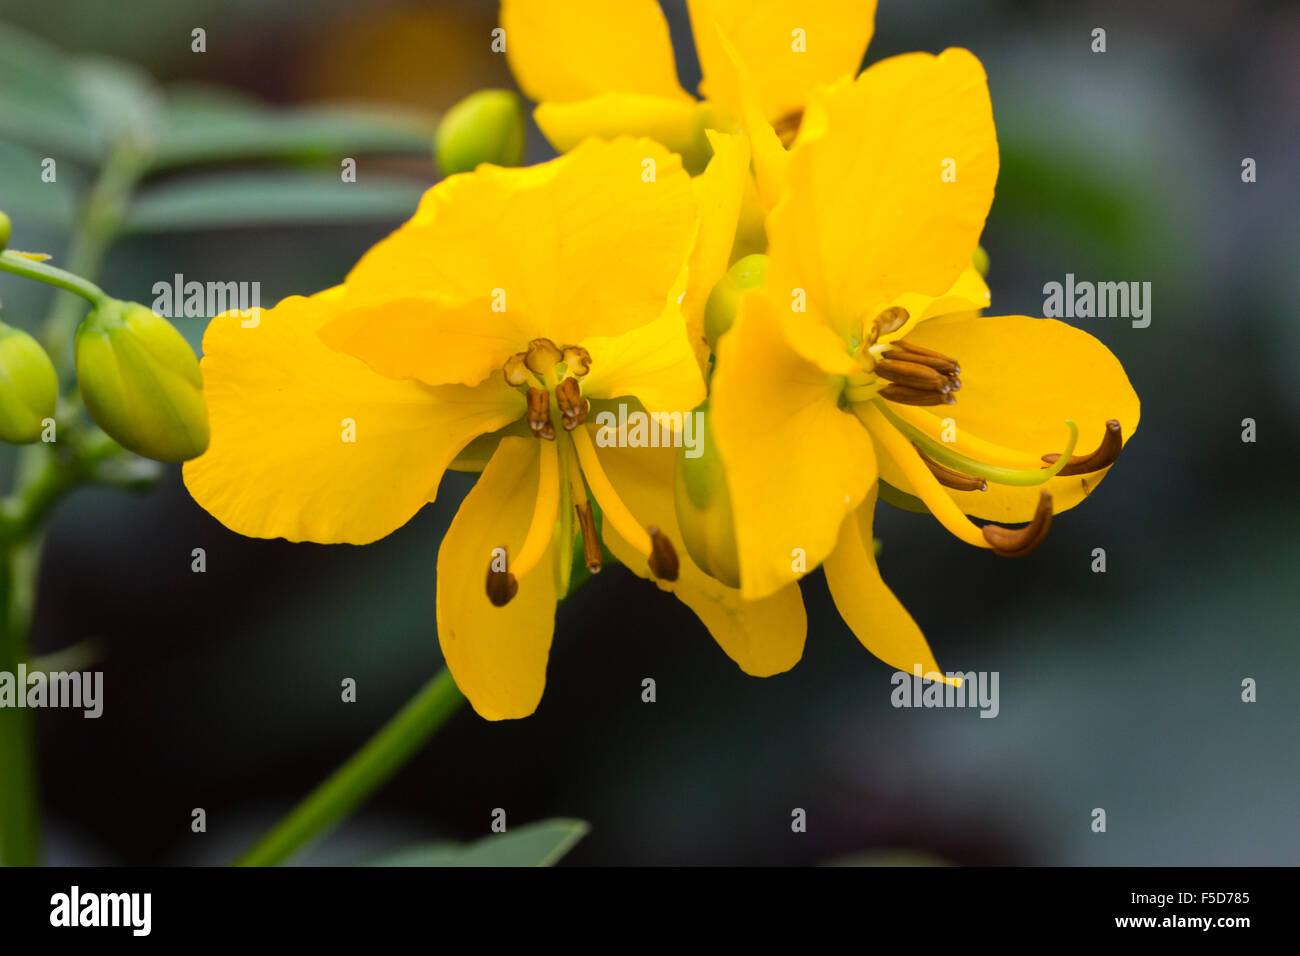 Yellow flowers of the sub-tropical shrub, Senna corymbosa, grown as a conservatory plant Stock Photo